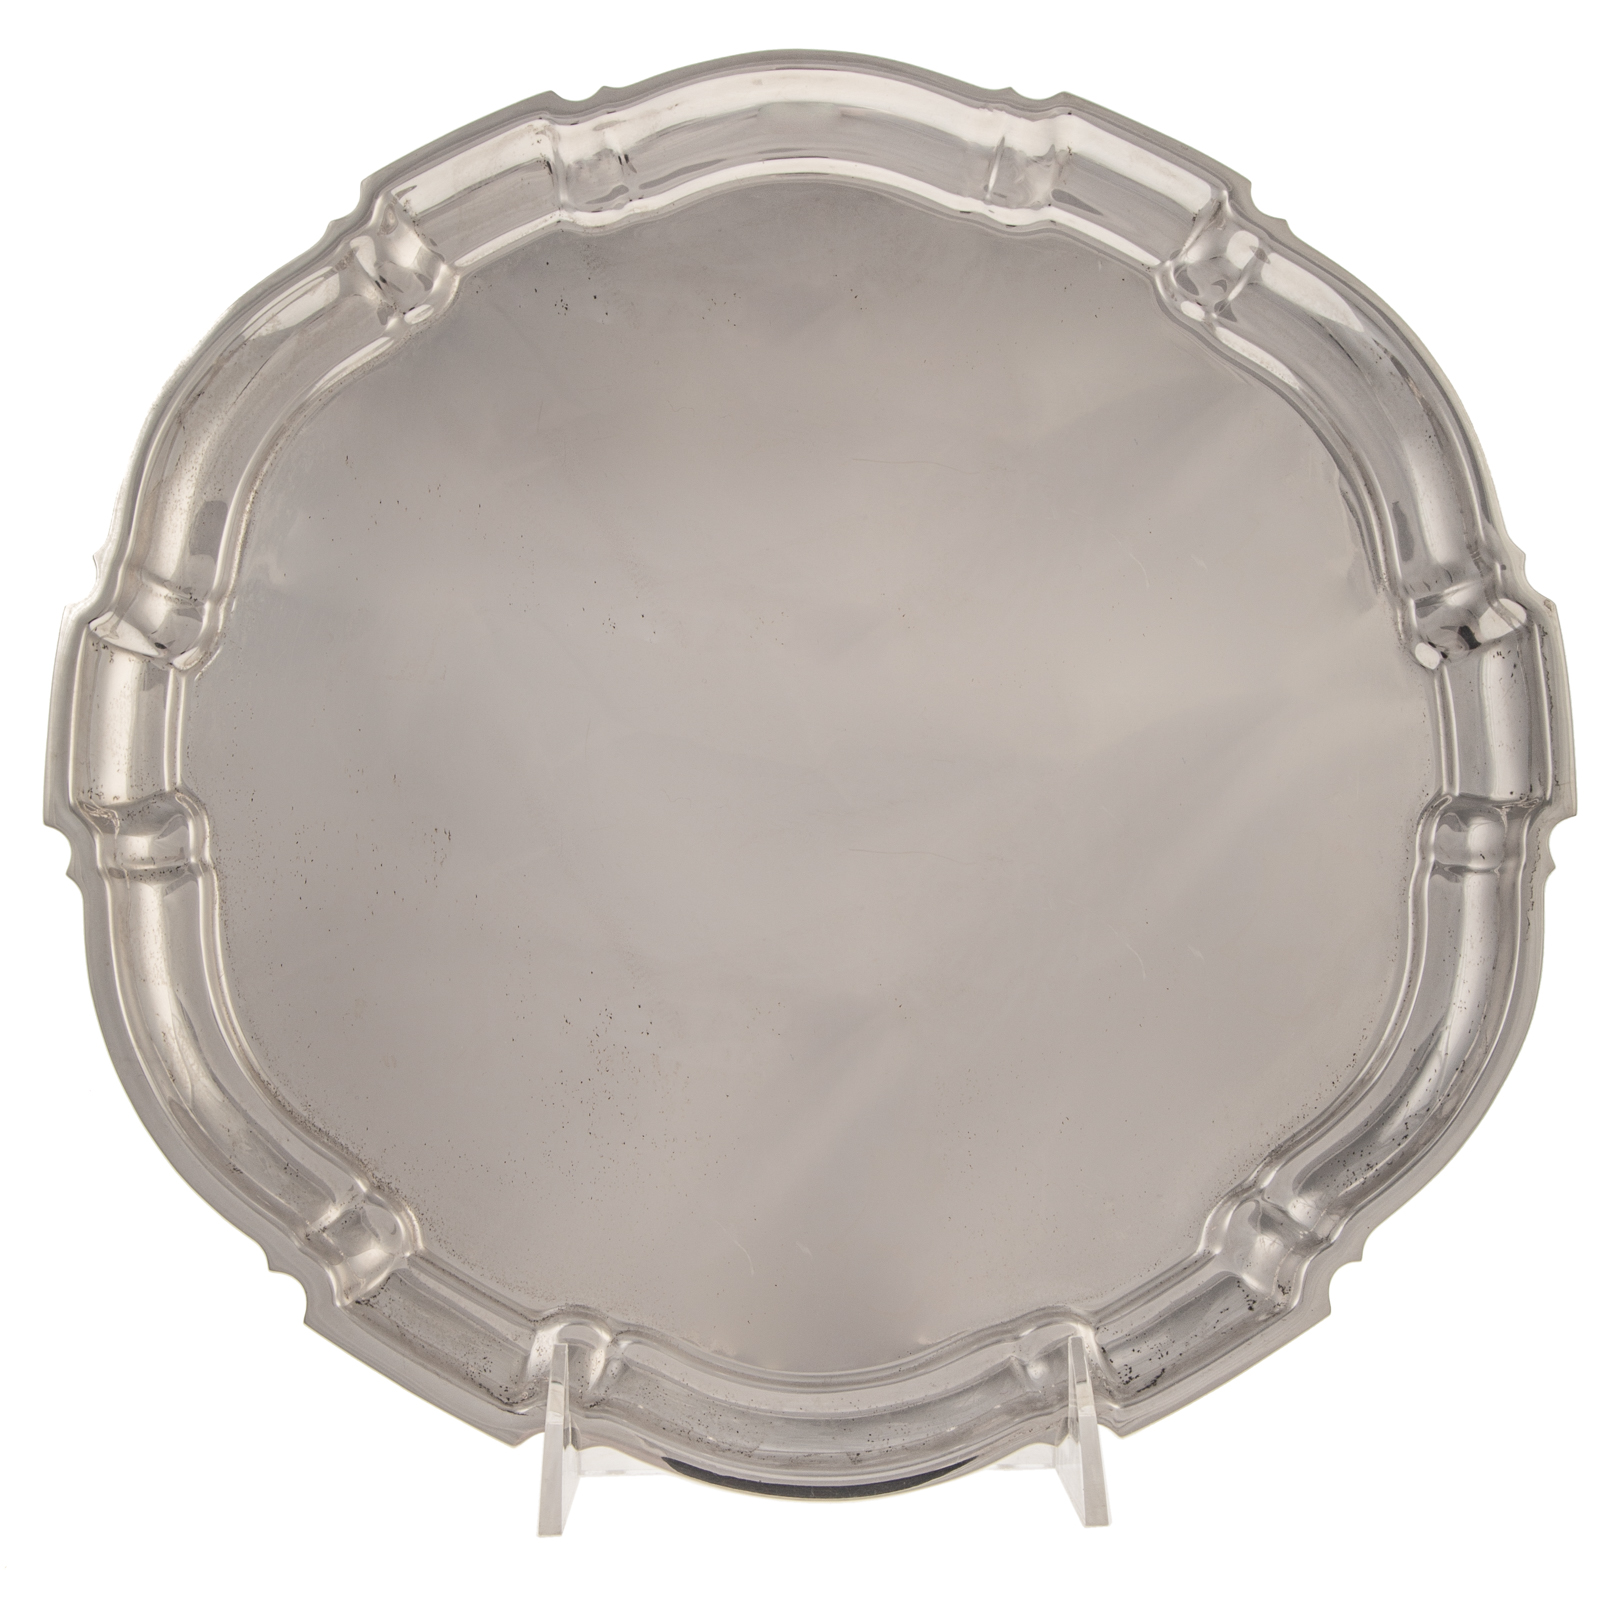 POOLE STERLING CHIPPENDALE TRAY 338725